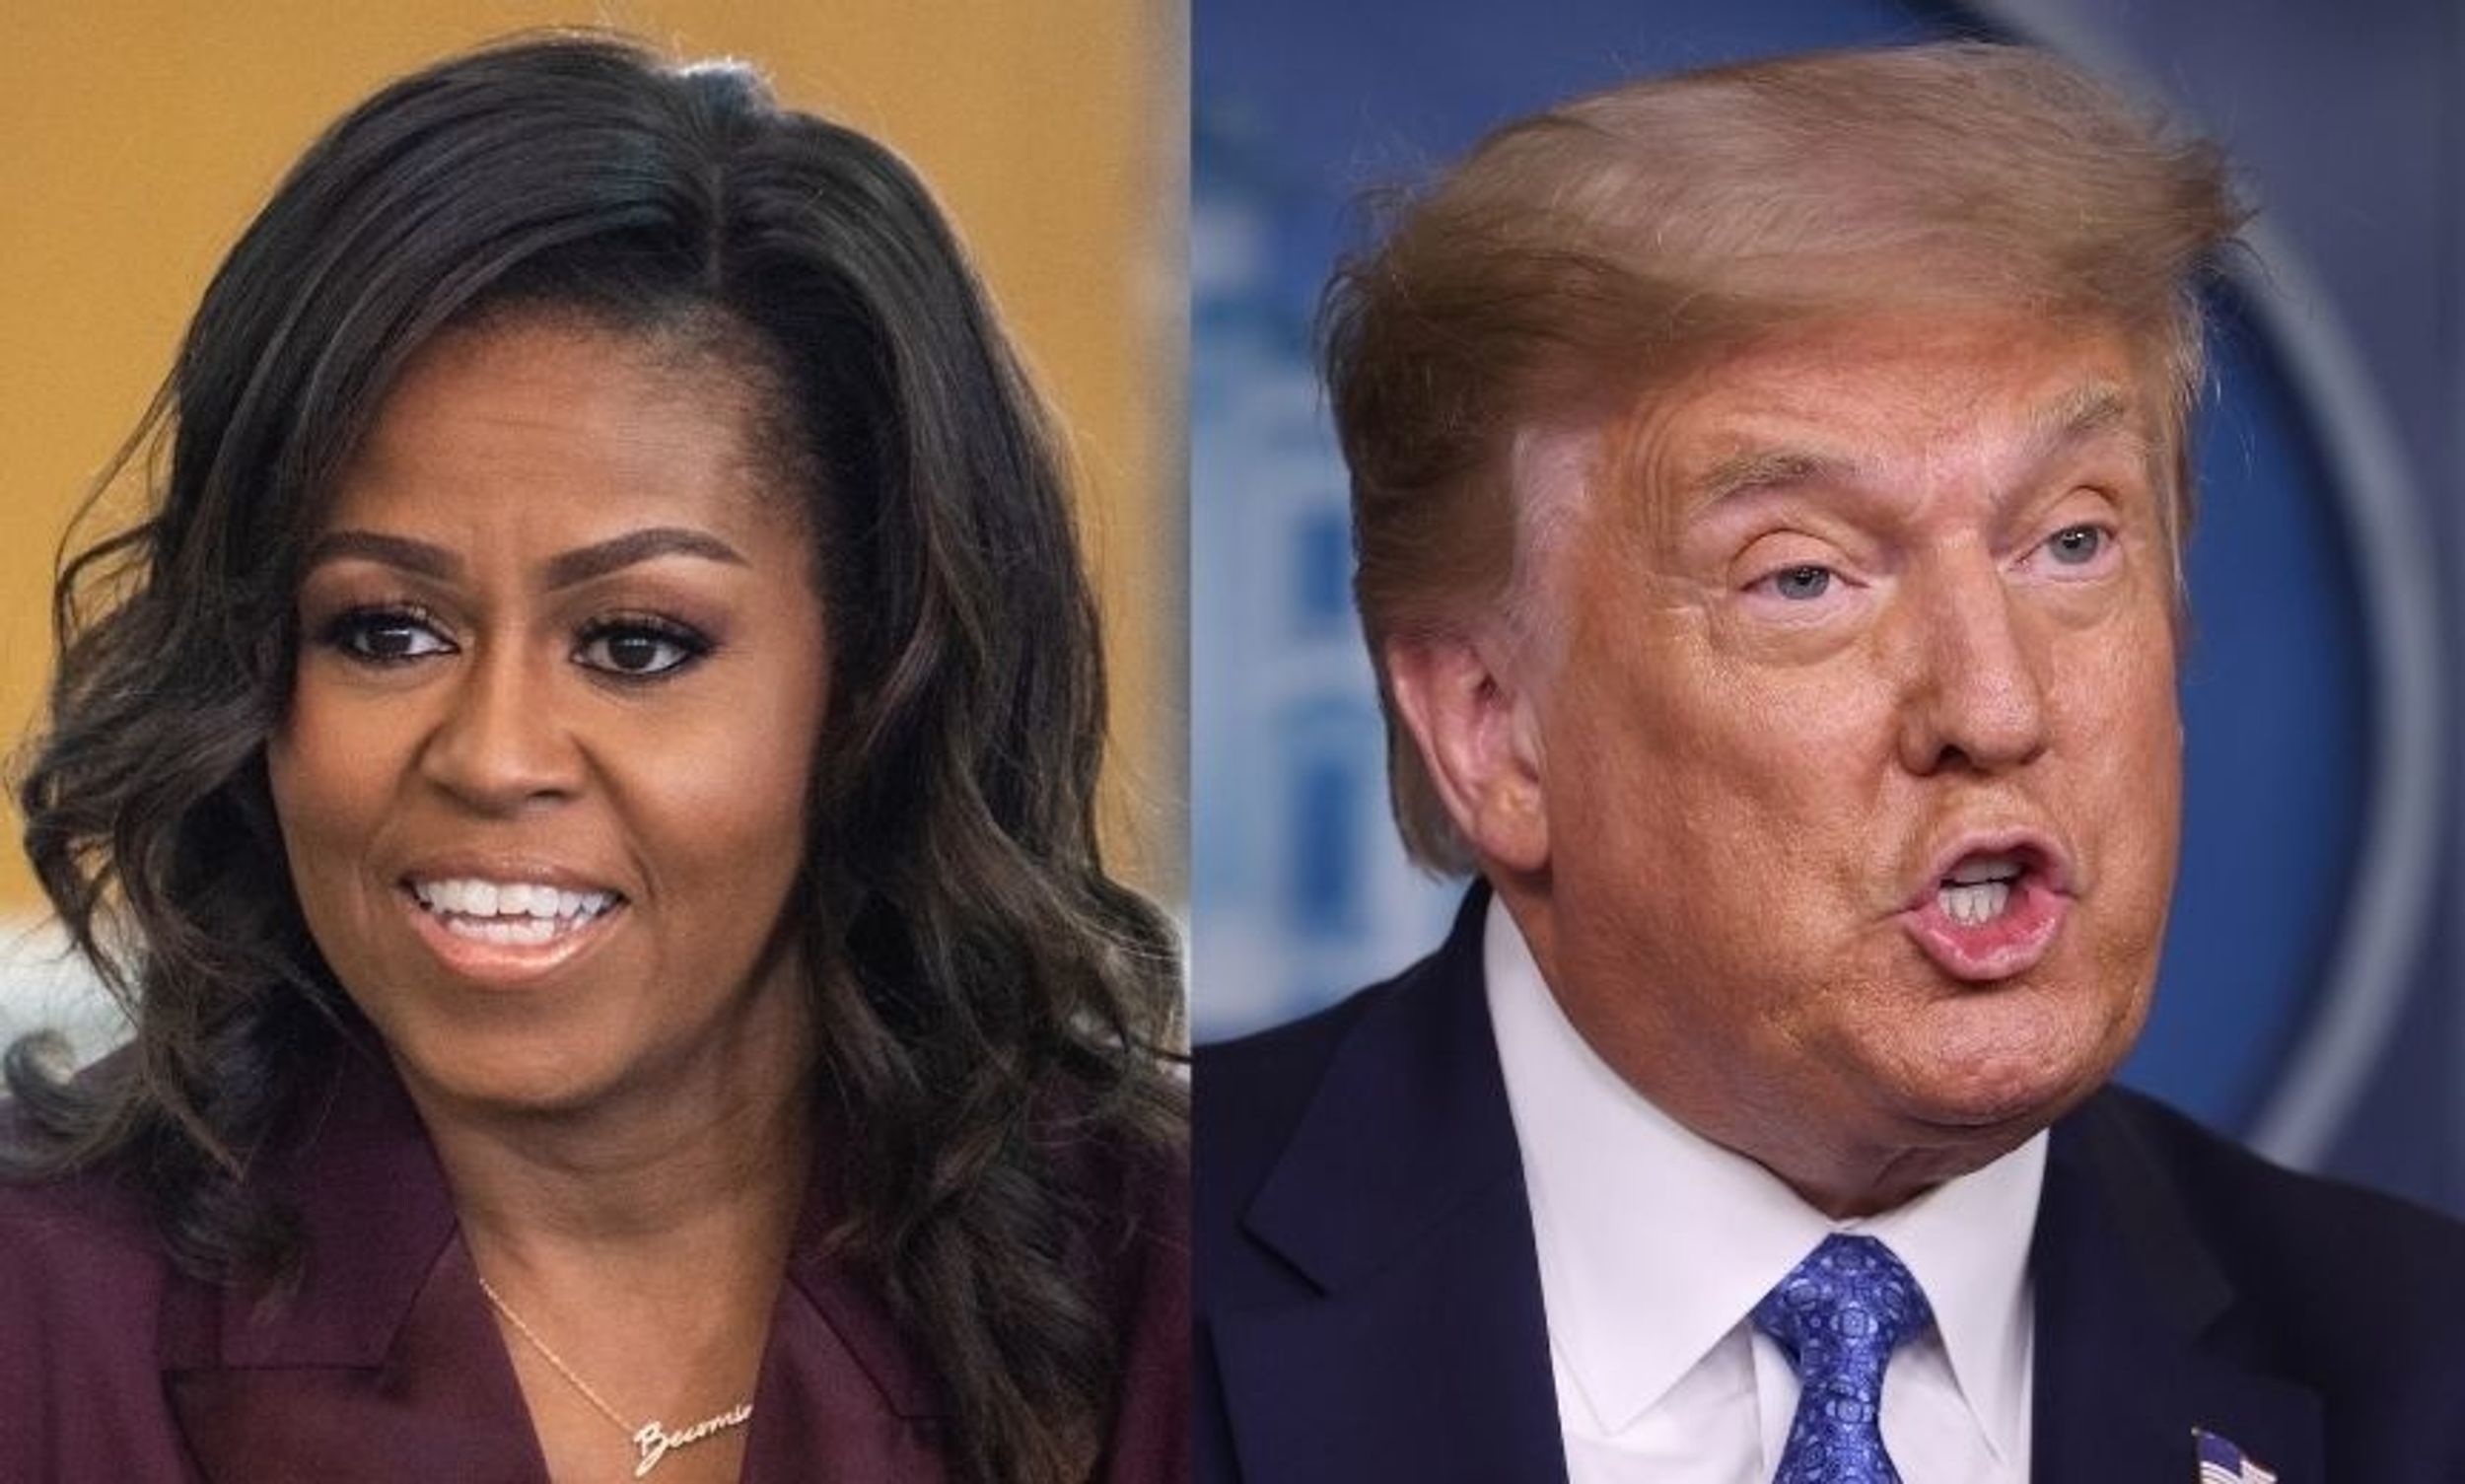 Michelle Obama Skewers Trump for His Refusal to Concede in Epic Instagram Post Recalling How She Felt 4 Years Ago